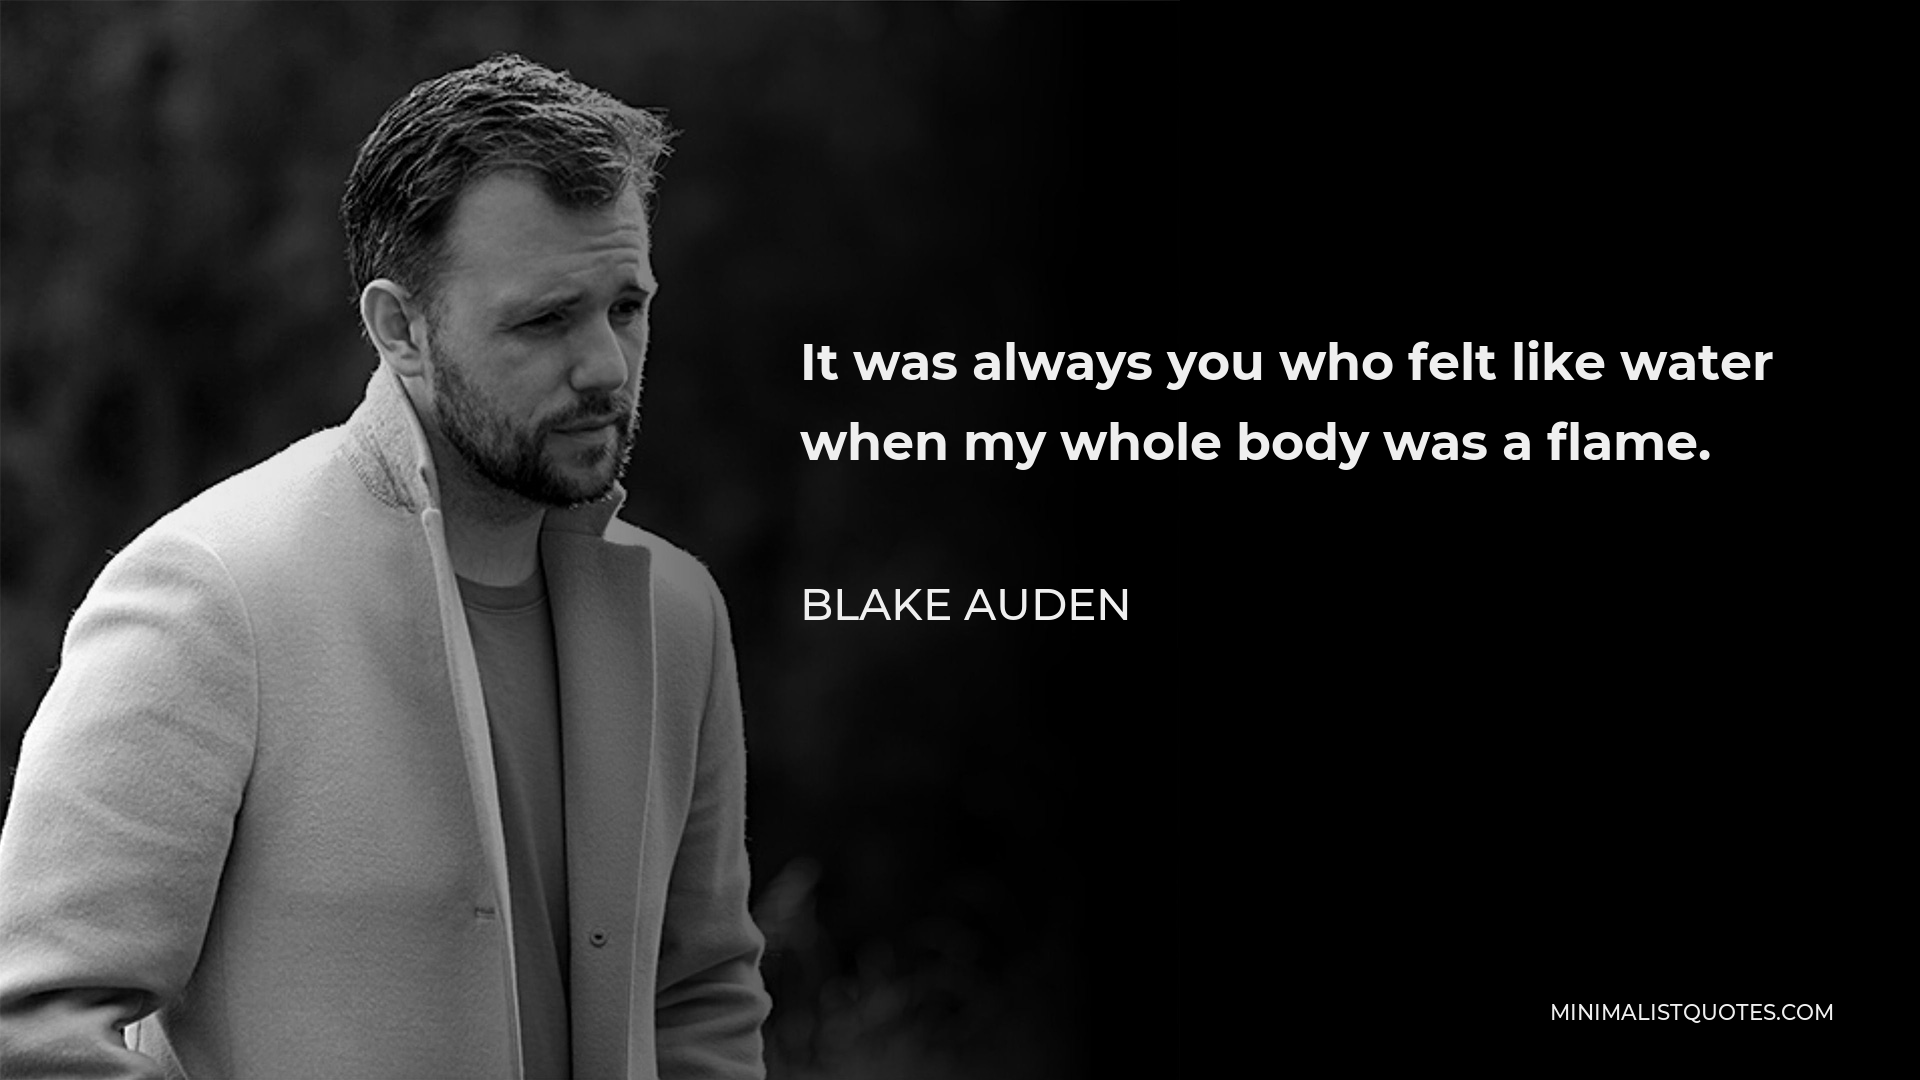 Blake Auden Quote - It was always you who felt like water when my whole body was a flame.